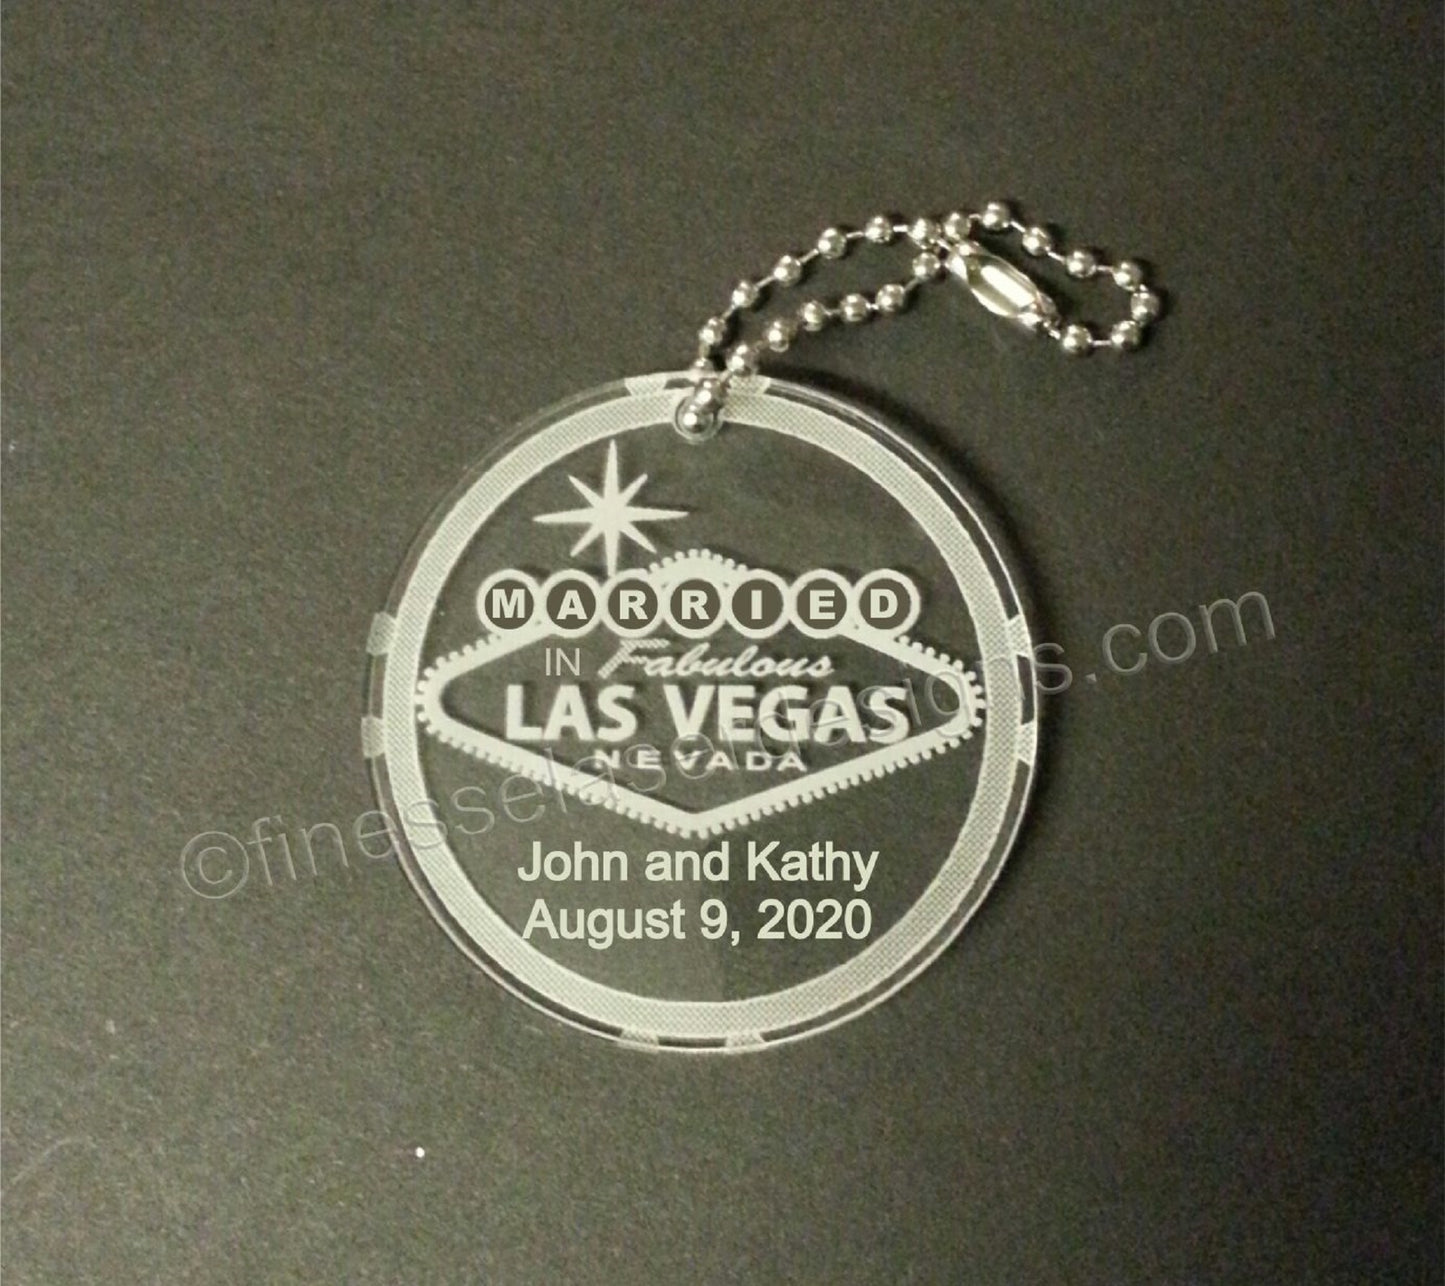 Married in Las Vegas round keychain along with names and date